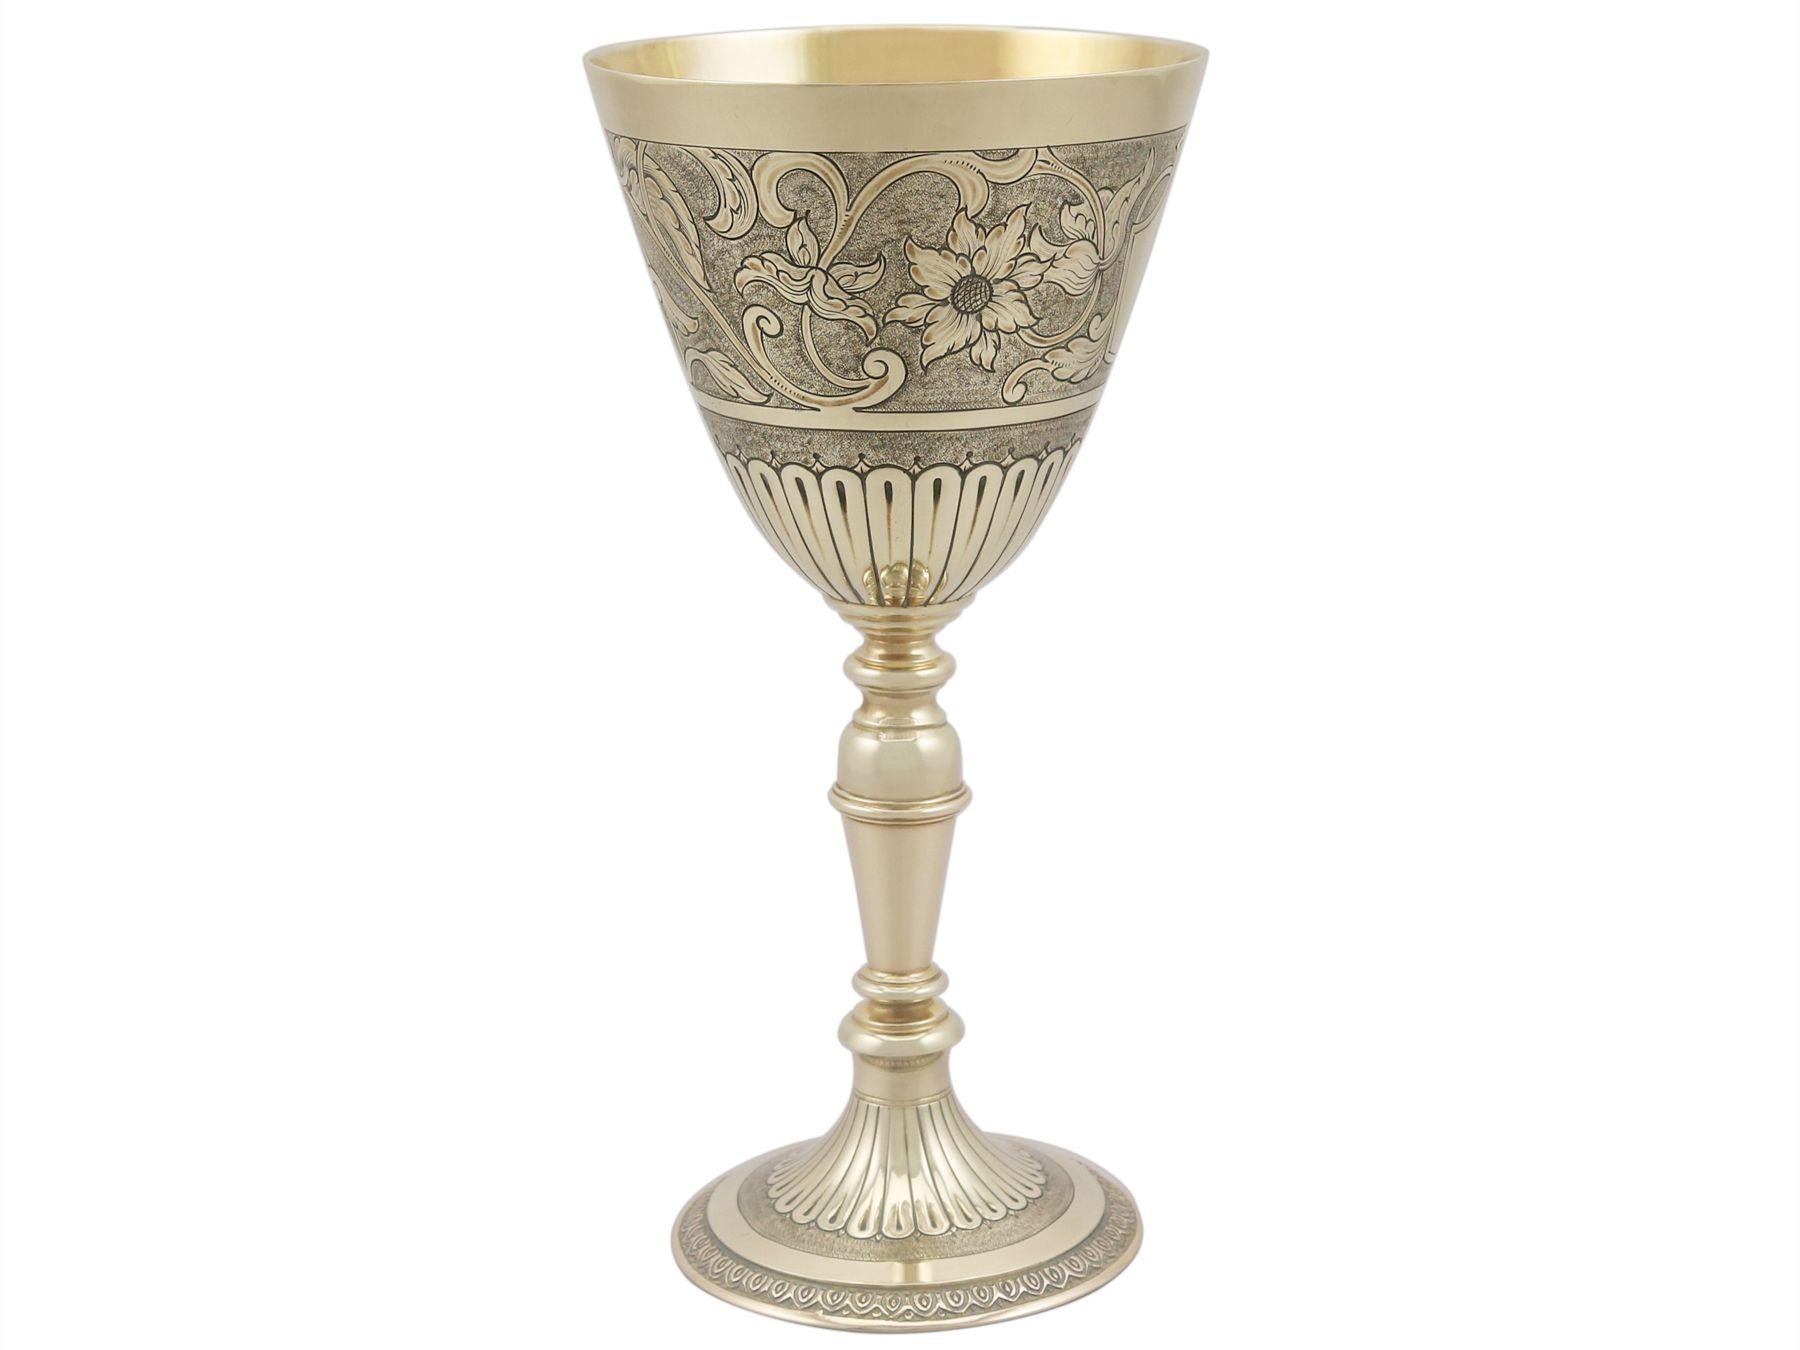 1960s 9K Yellow Gold Presentation Cup Vintage In Excellent Condition For Sale In Jesmond, Newcastle Upon Tyne